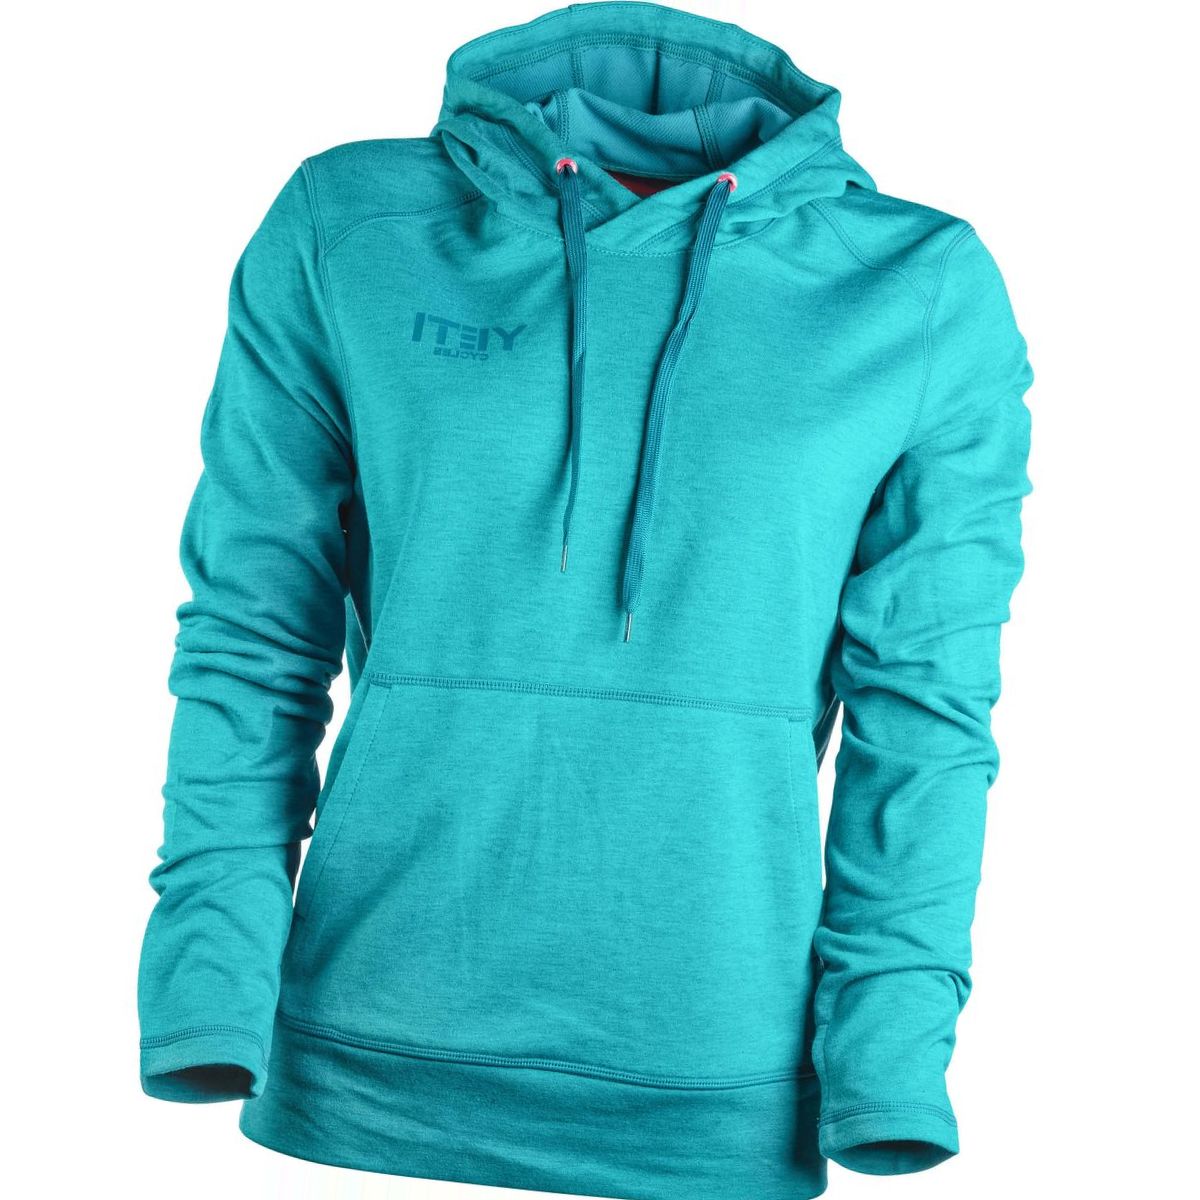 Yeti Cycles Vapor Hooded Pullover - Women's